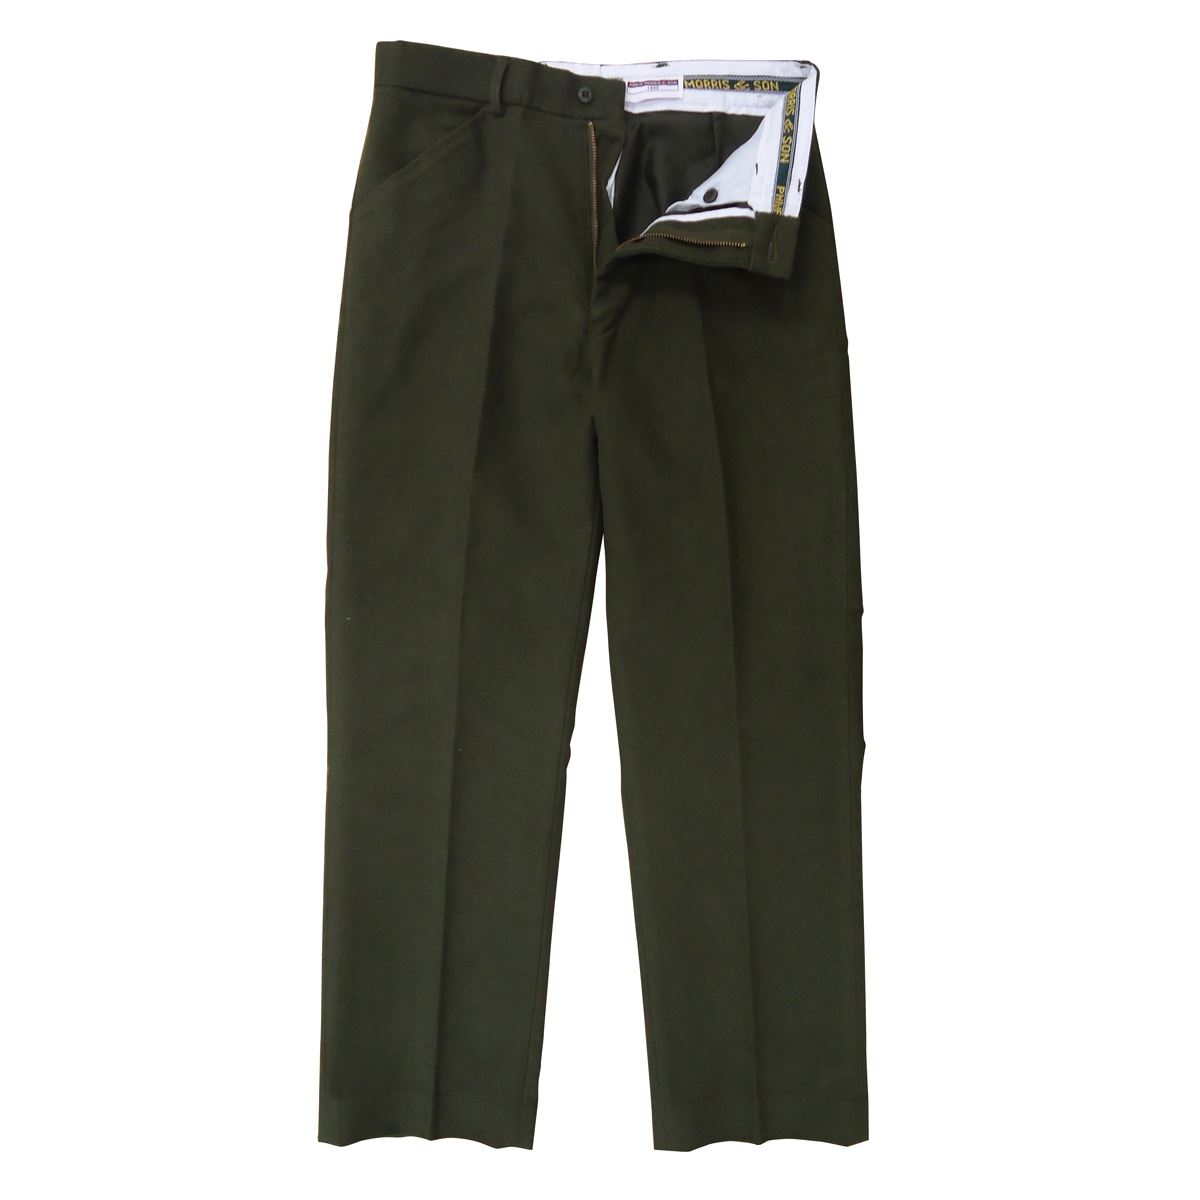 Which shoes are best for mens moleskin trousers?